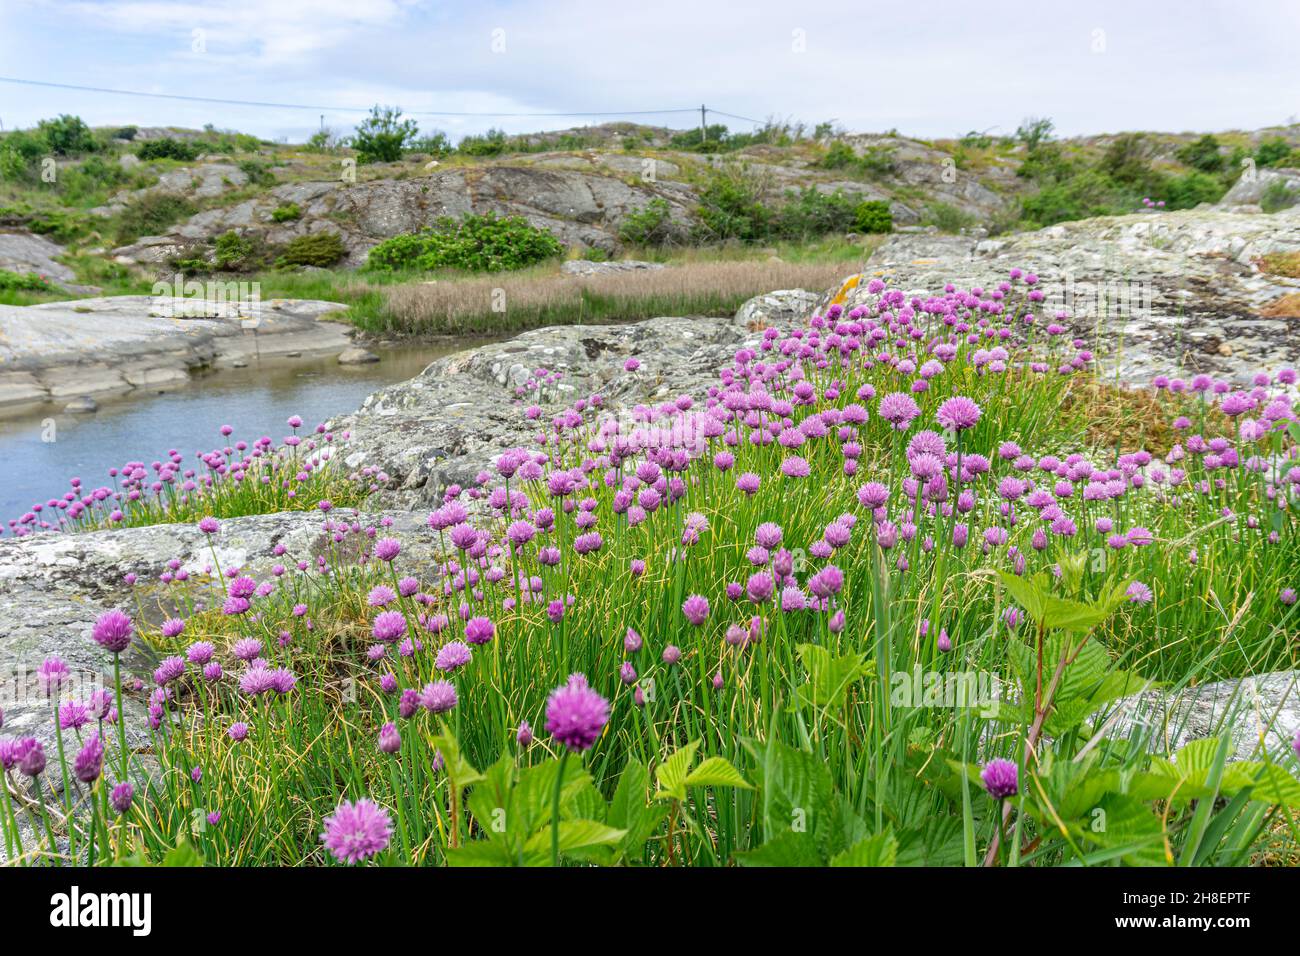 Ockero, Sweden - June 10, 2021: Lovely meadow with lilac flowers on the small hill above the water chanel Stock Photo